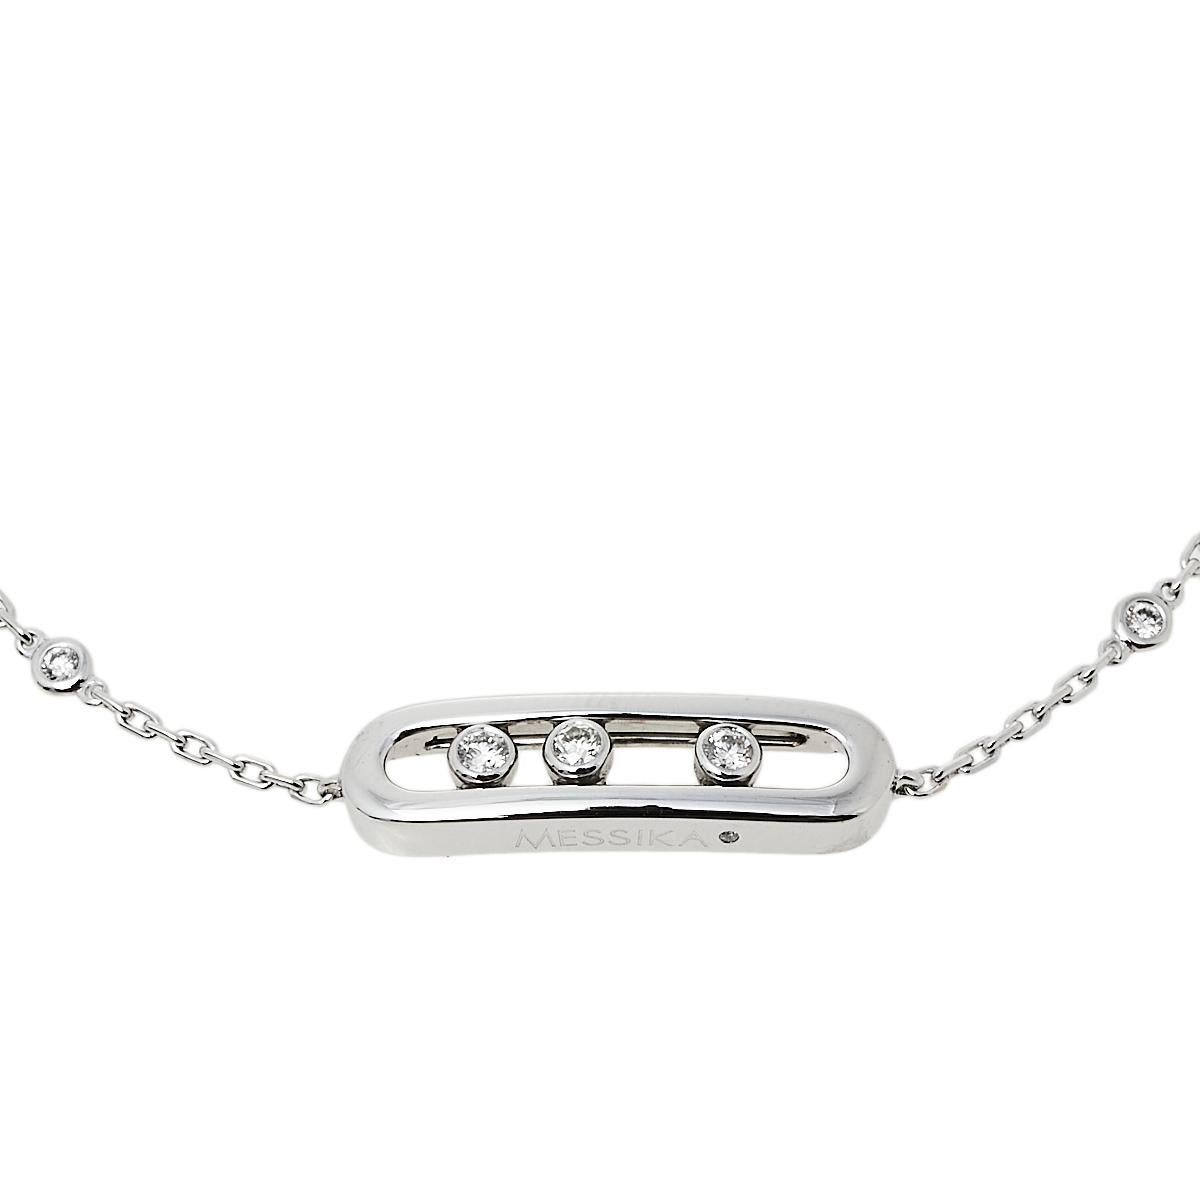 The Move collection has designs that are both wearable and timeless. This wondrous thing of beauty is the Messika Baby Move bracelet, made using 18k white gold. It has a chain holding a cage, and within it, three diamonds are left to slide and move